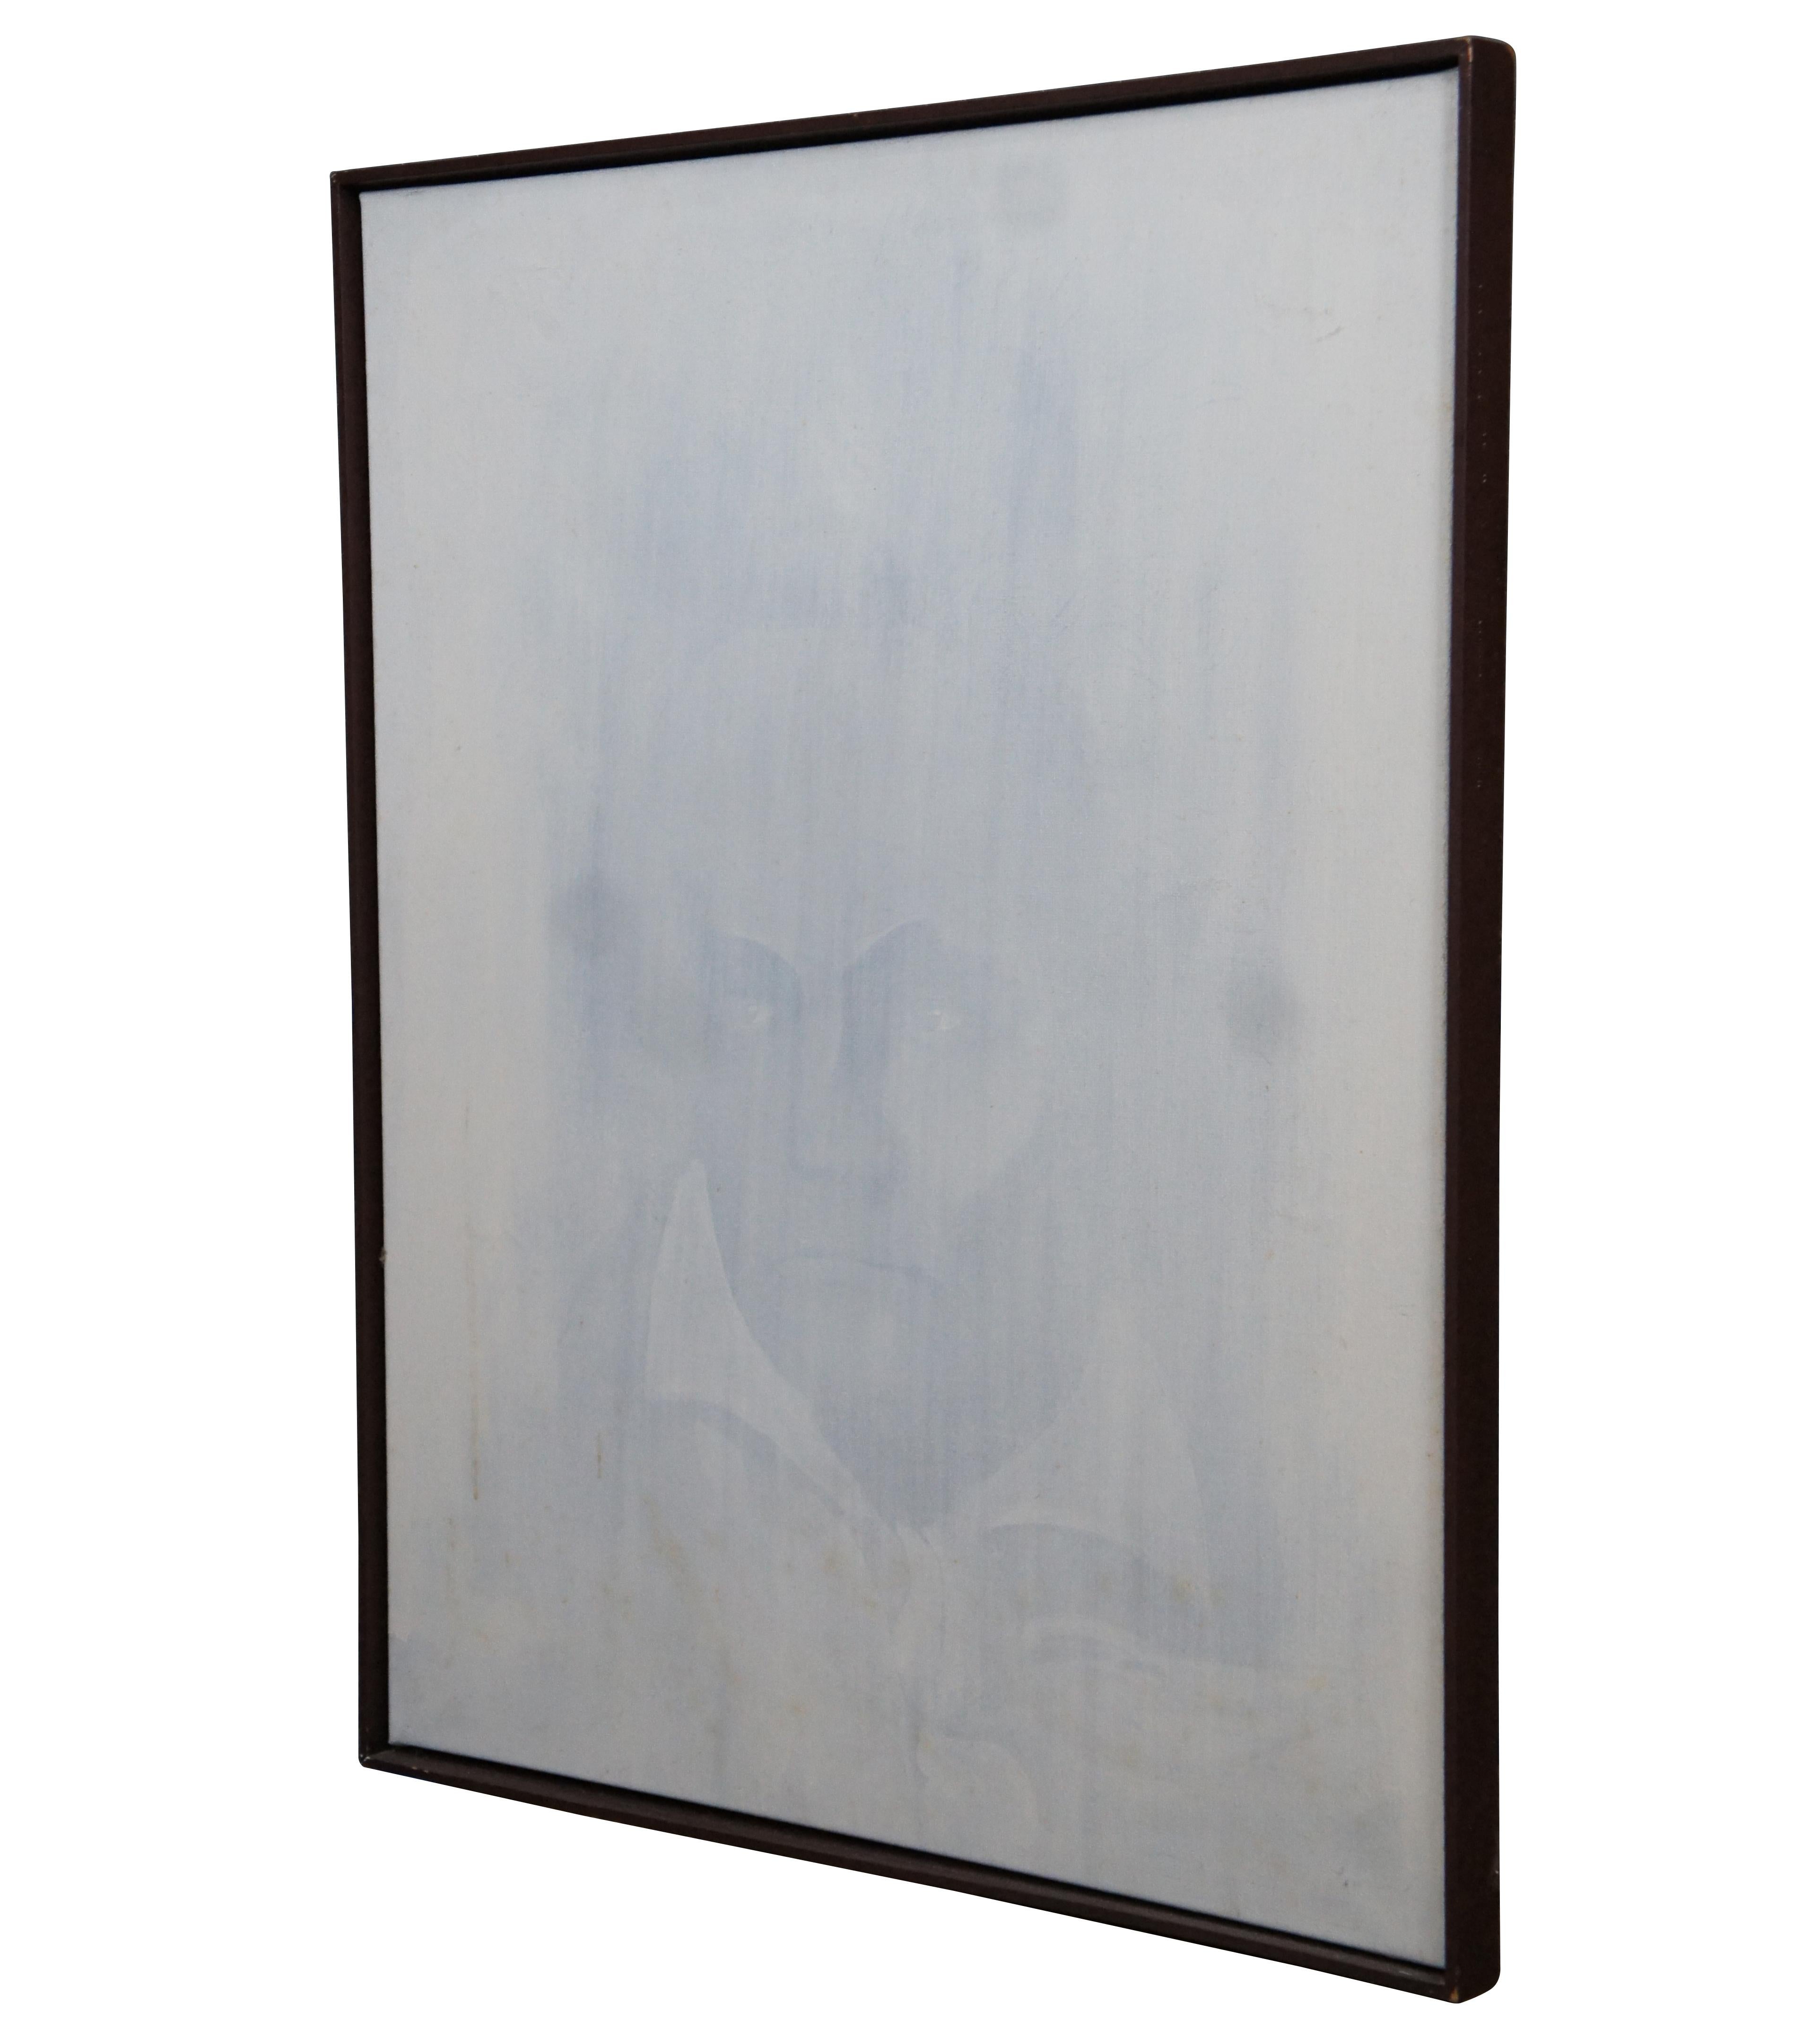 A unique modern portrait painting on burlap of Ludwig von Beethoven, with a white wash finish / overlay. Signed and dated by artist on verso.

Measures: 32.5” x 1.875” x 40.5” / Sans Frame - 31.5” x 39.5” (Width x Depth x Height)